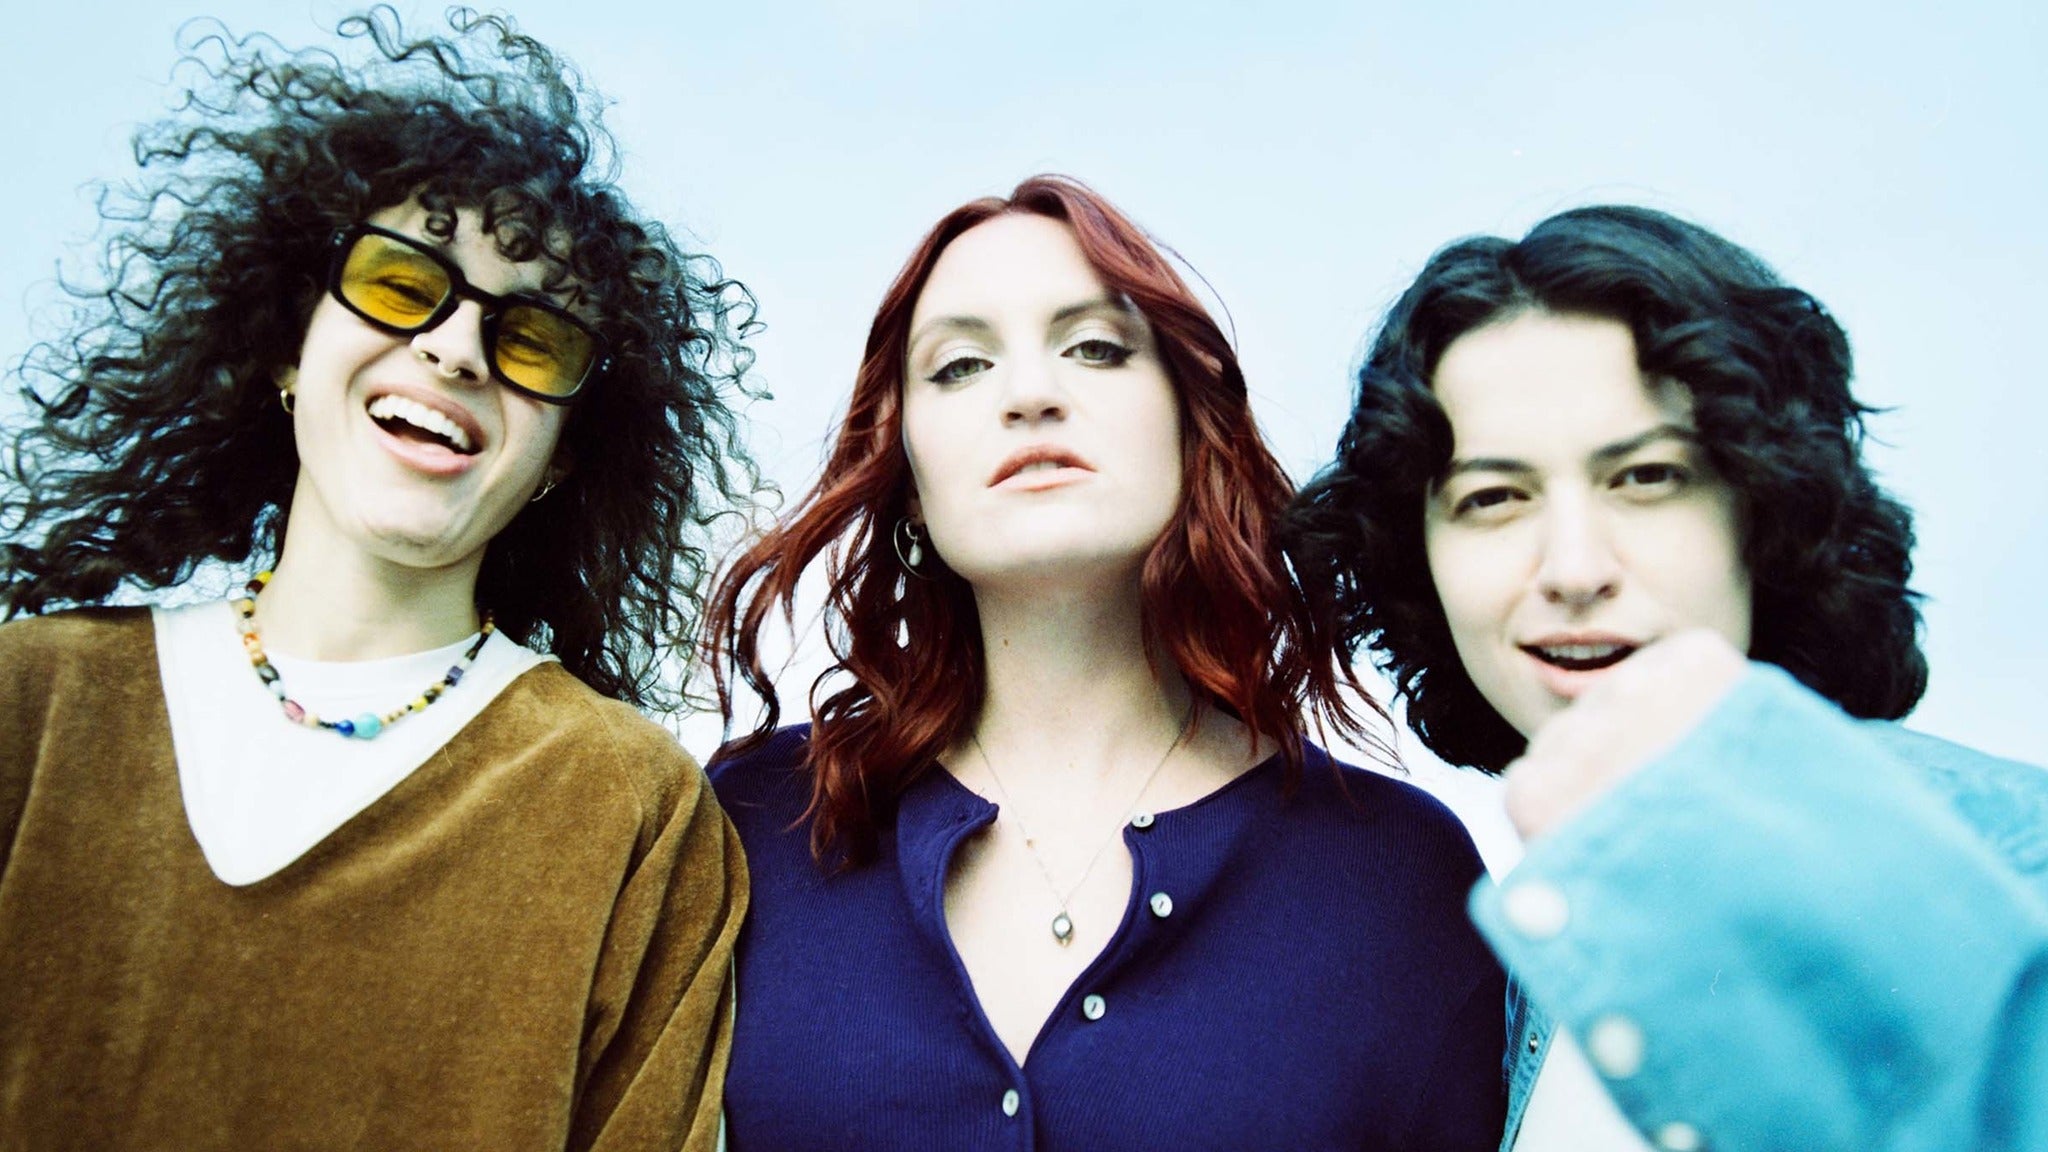 MUNA at Knitting Factory Concert House - Boise - Boise, ID 83702